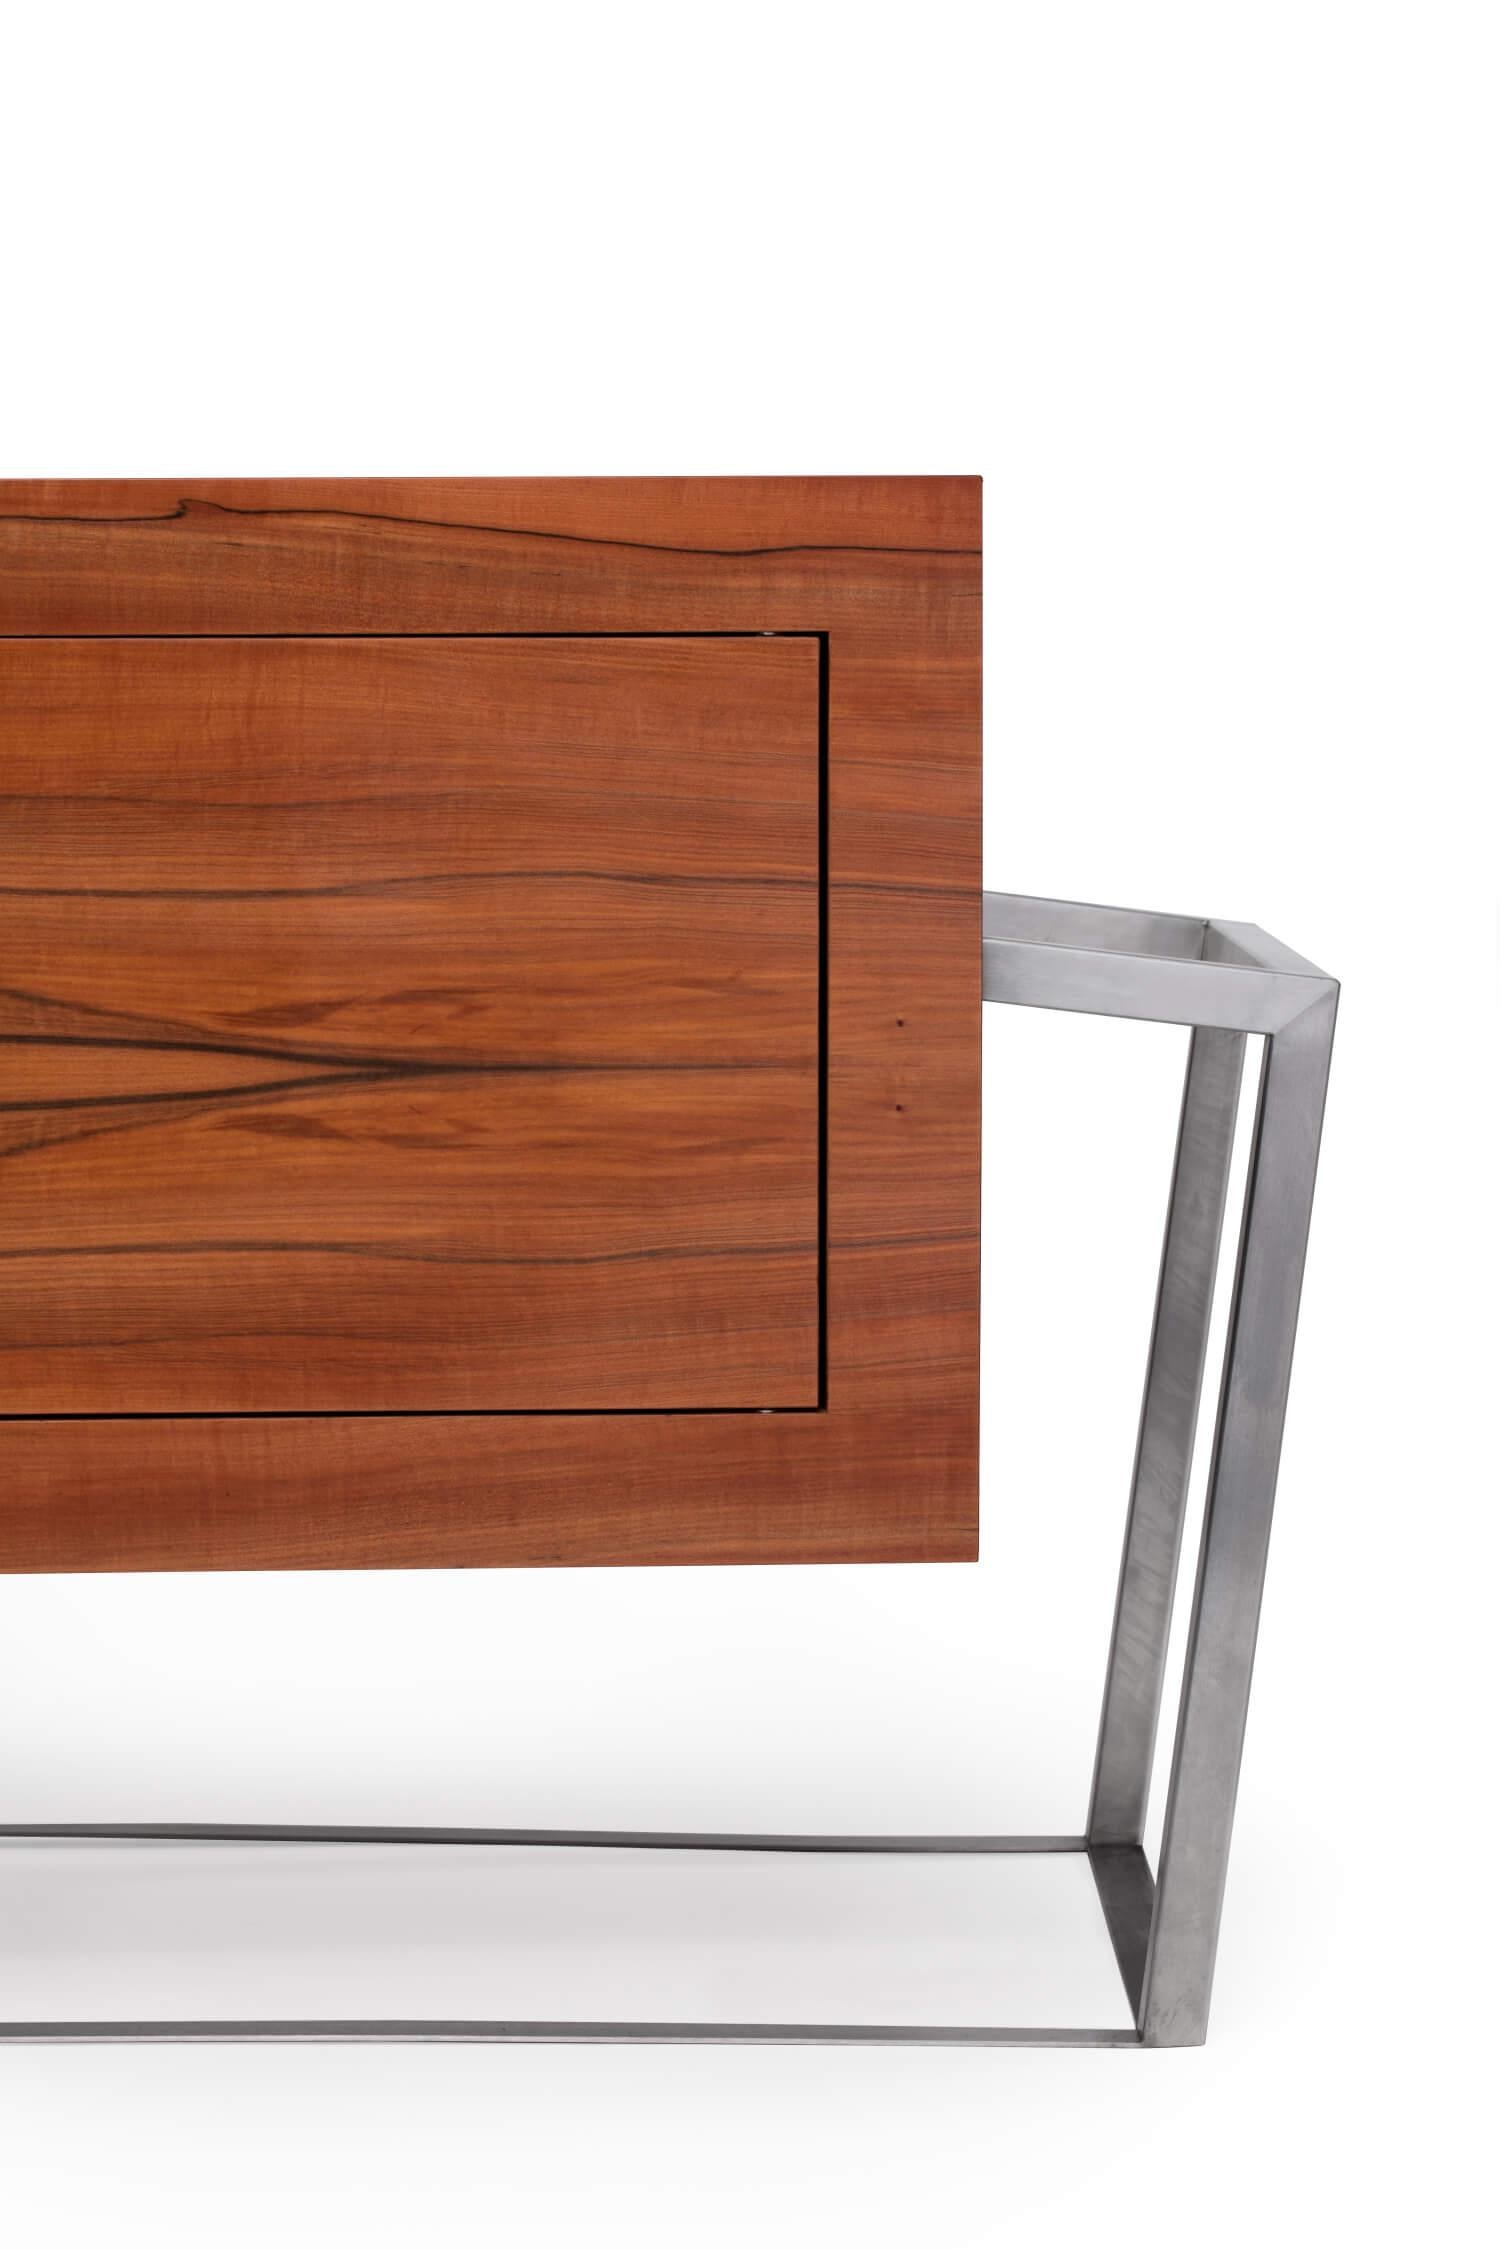 Modern Accent Credenza Sideboard in Tineo Wood and Brushed Stainless Steel In New Condition For Sale In Vila Nova Famalicão, PT